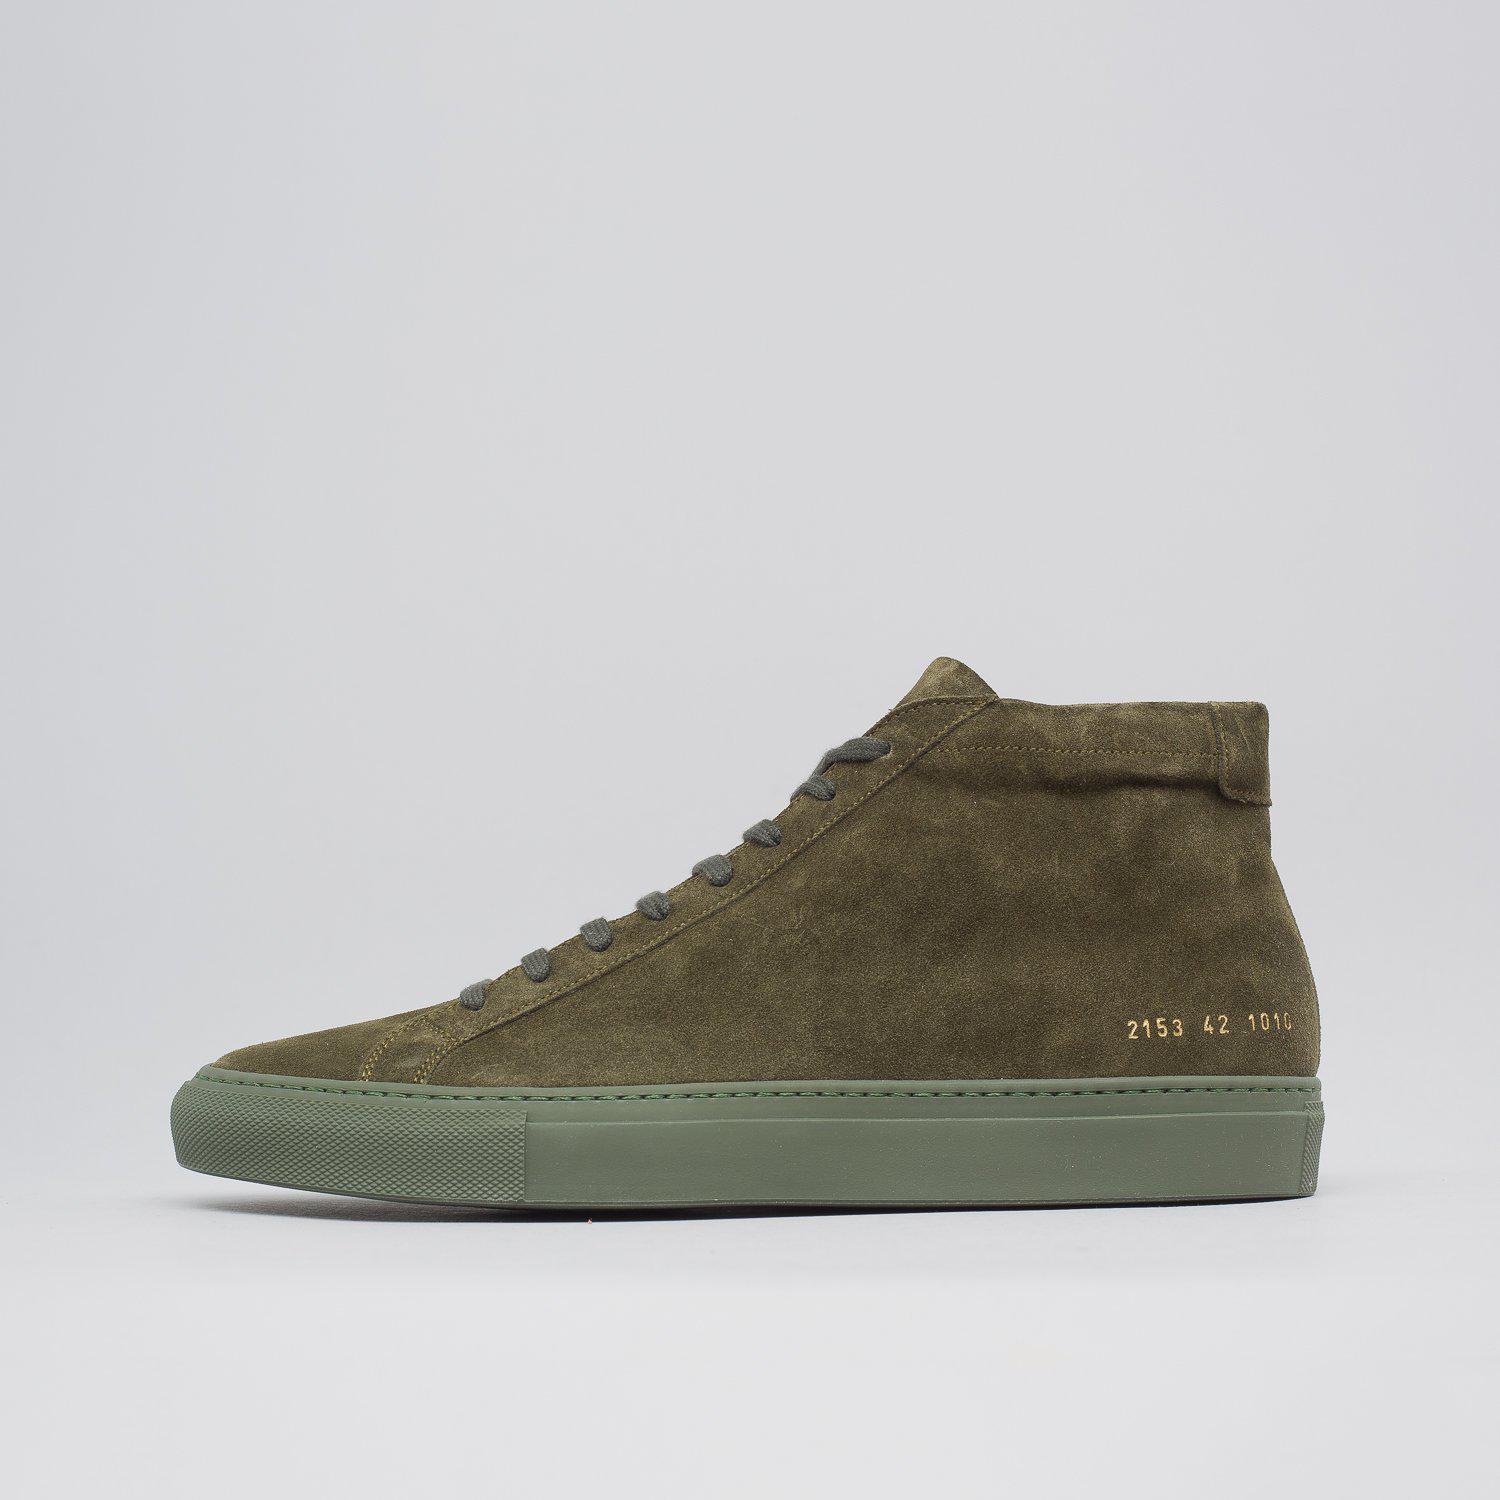 Common Projects Achilles Mid Suede In Olive in Green for Men - Lyst